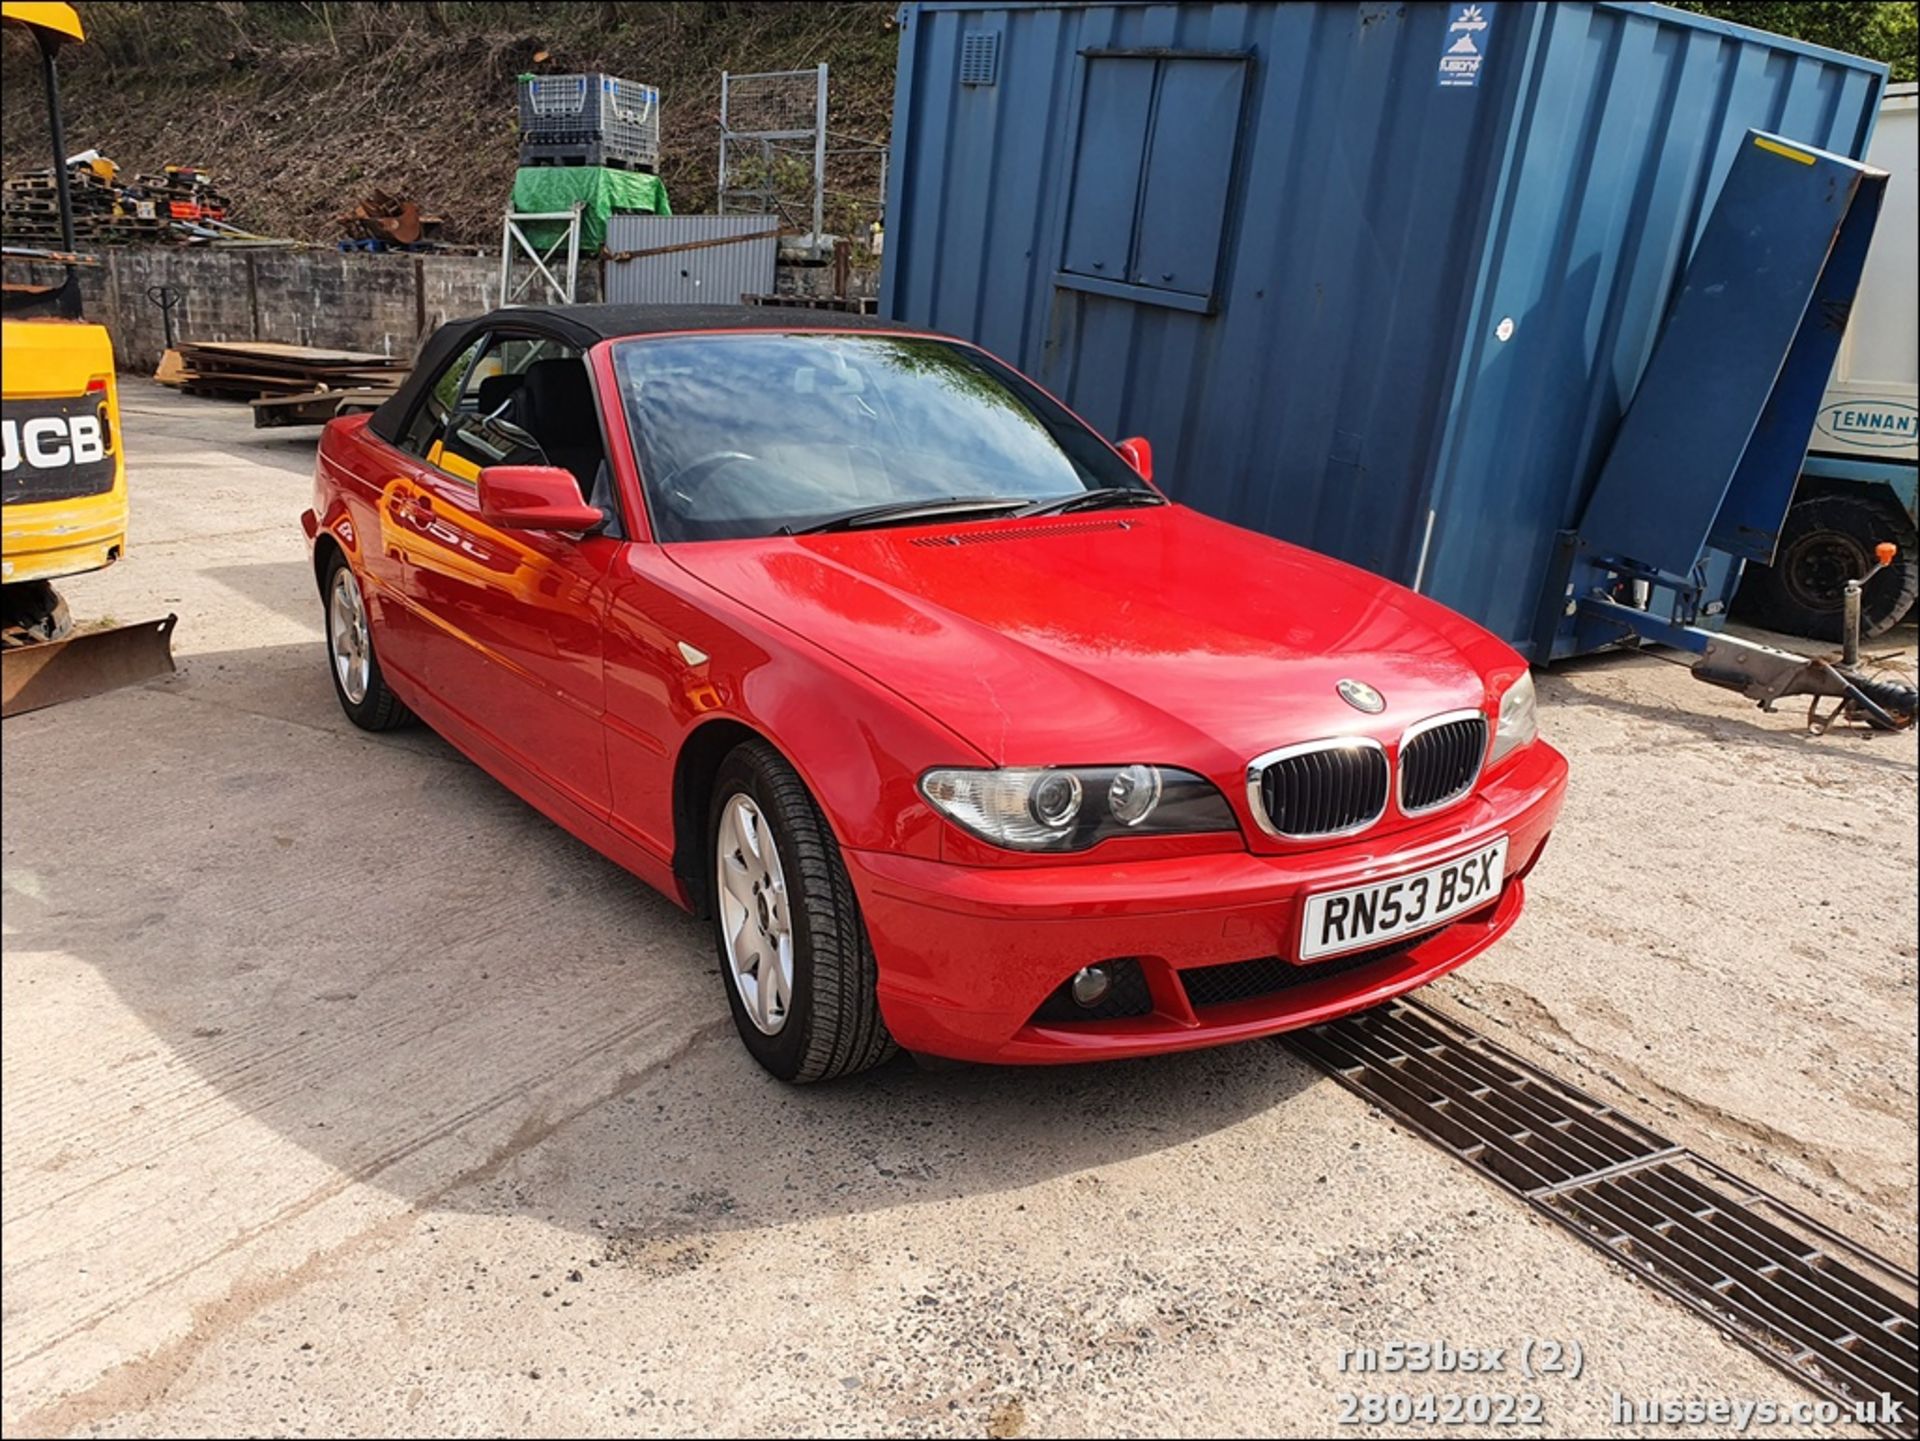 03/53 BMW 318 CI SE - 1995cc 2dr Convertible (Red) - Image 2 of 25